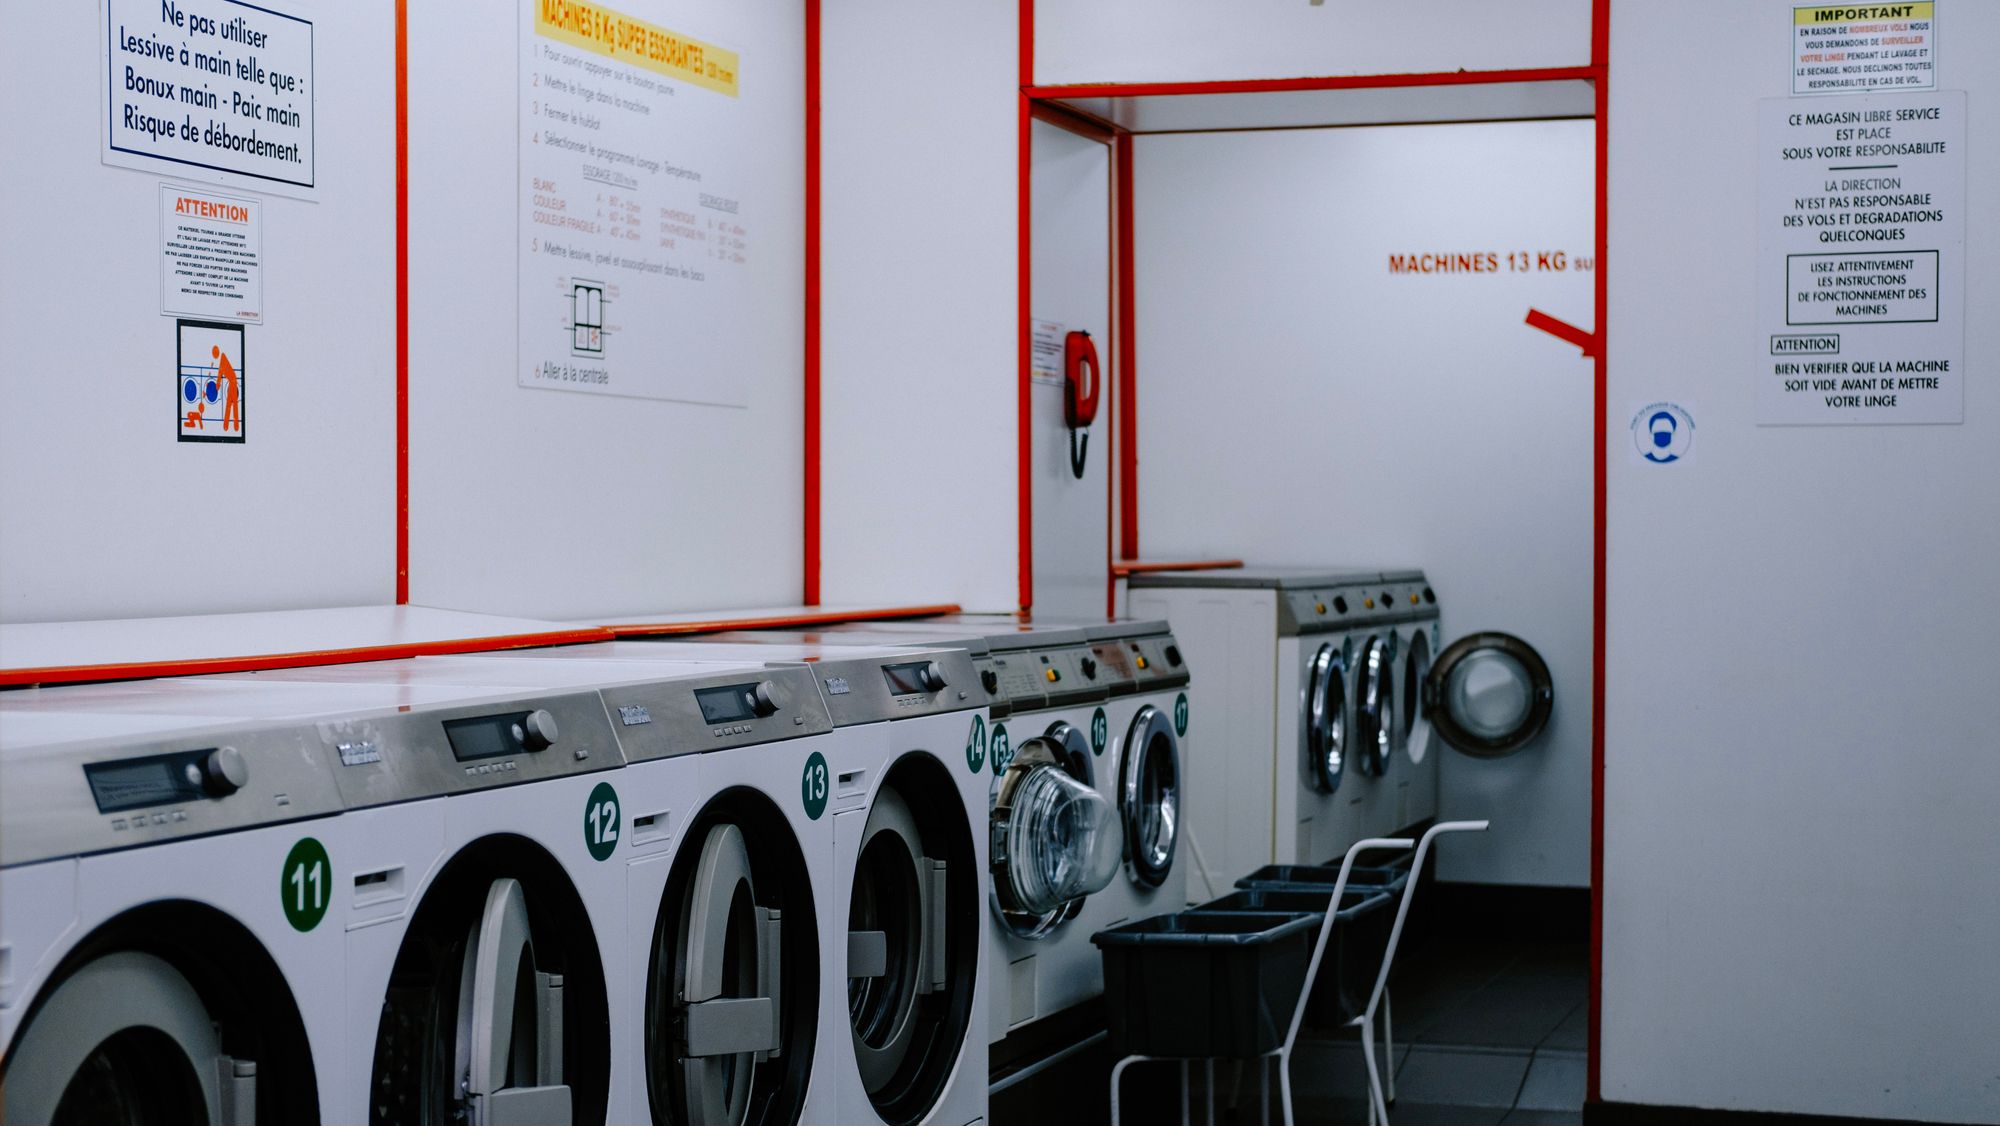 Is Owning a Laundromat Profitable? The Pros & Cons of Owning a Laundromat